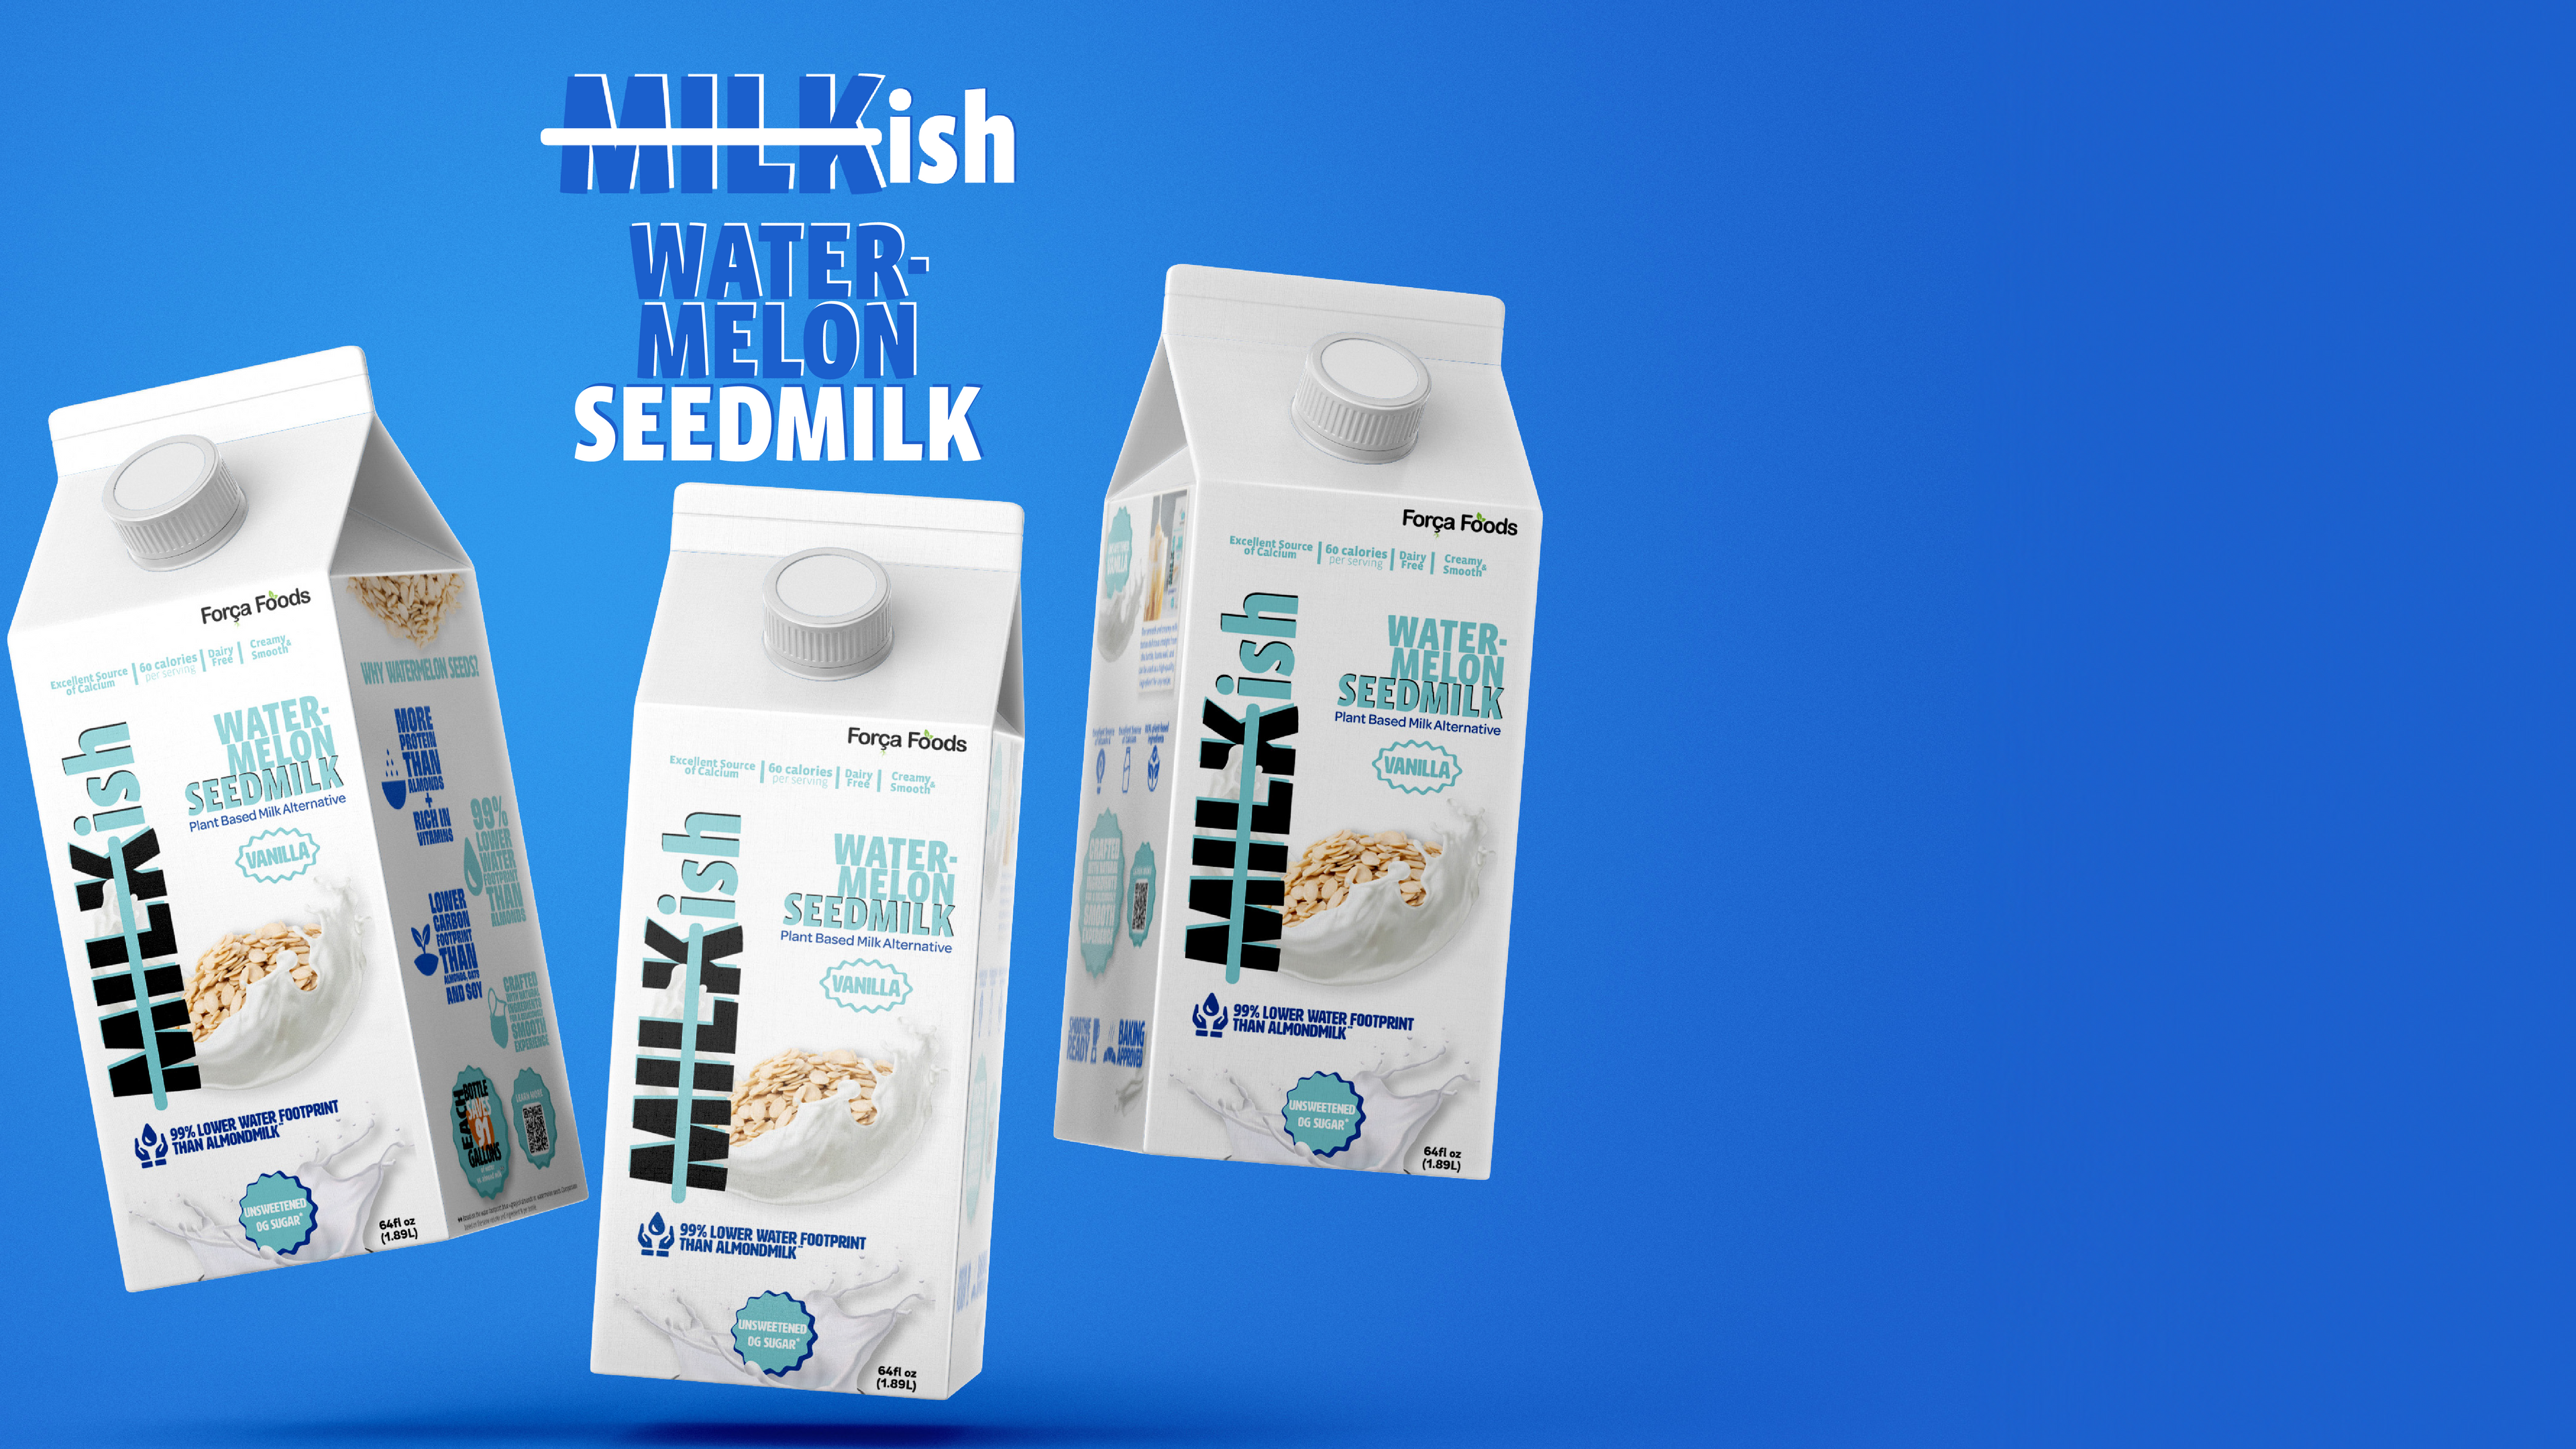 Plant based milk cartons with the caption "Watermelon Seed Milk"